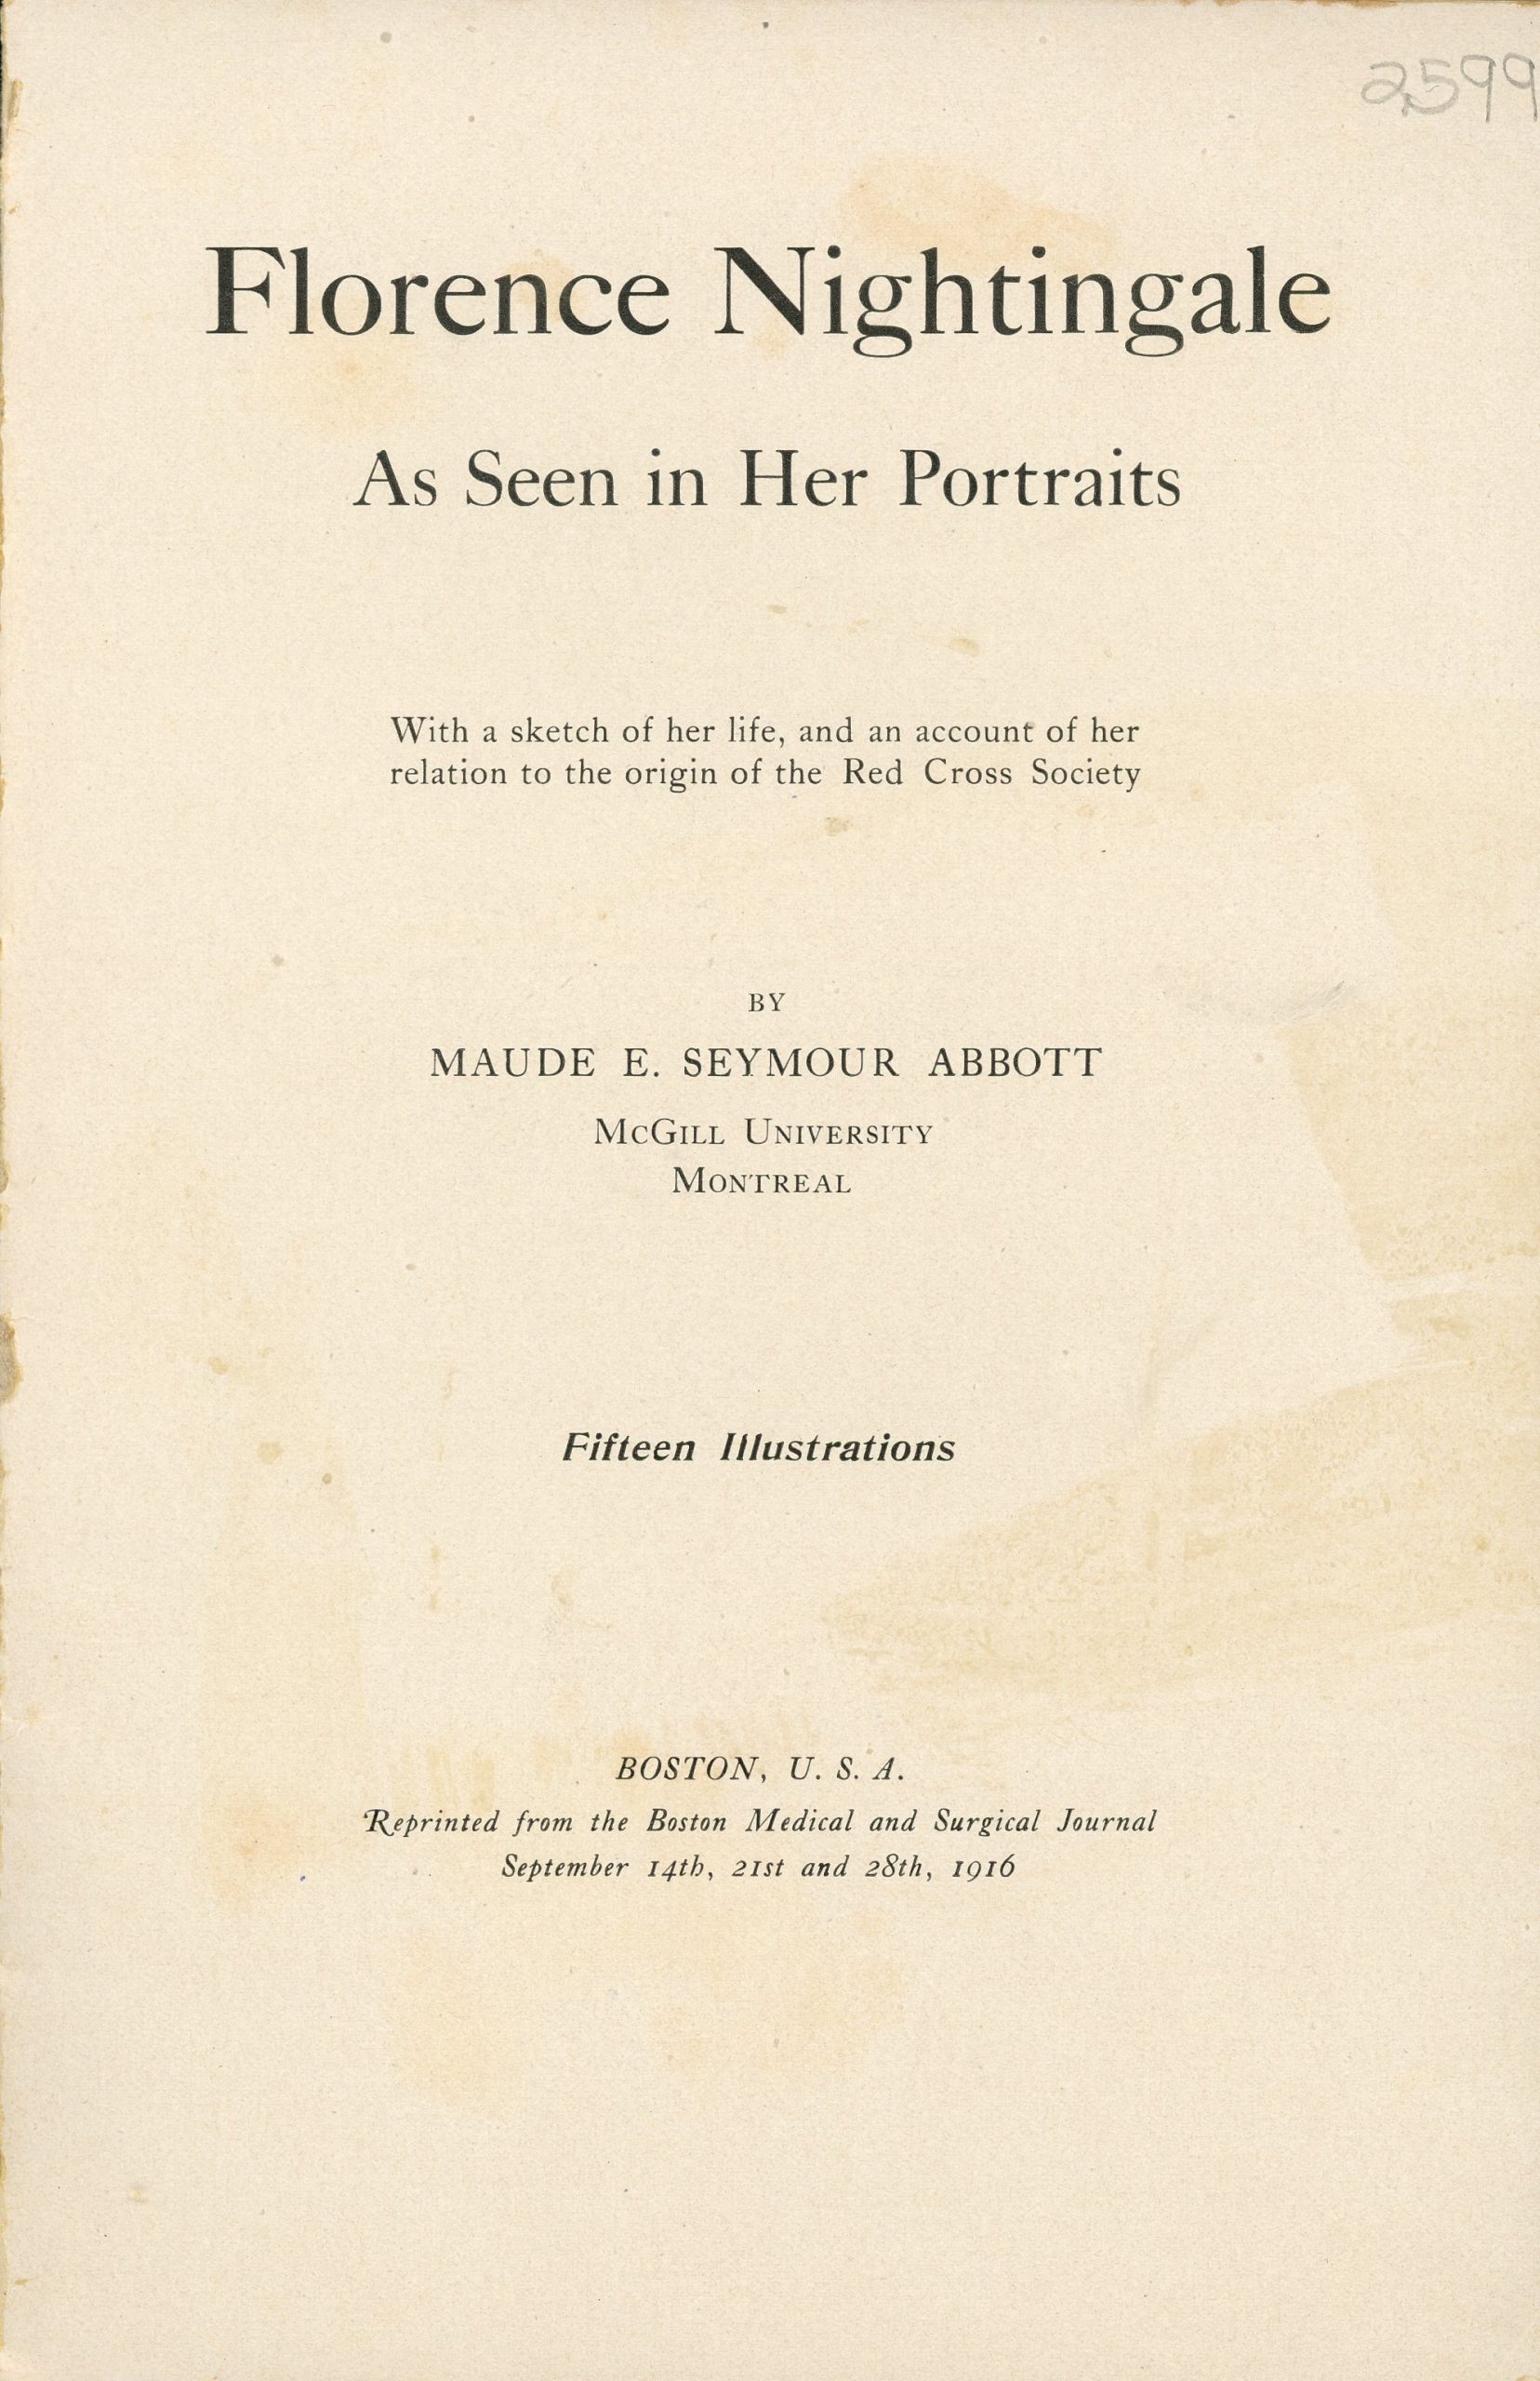 Title page of the book Florence Nightingale; sepia paper with the following text: “Florence Nightingale As Seen in Her Portraits With a sketch of her life, and an account of her relation to the origin of the Red Cross Society By MAUDE E. SEYMOUR ABBOTT McGill University Montreal Fifteen Illustrations BOSTON, U.S.A. Reprinted from the Boston Medical and Surgical Journal September 14th, 21st and 28th, 1916”.